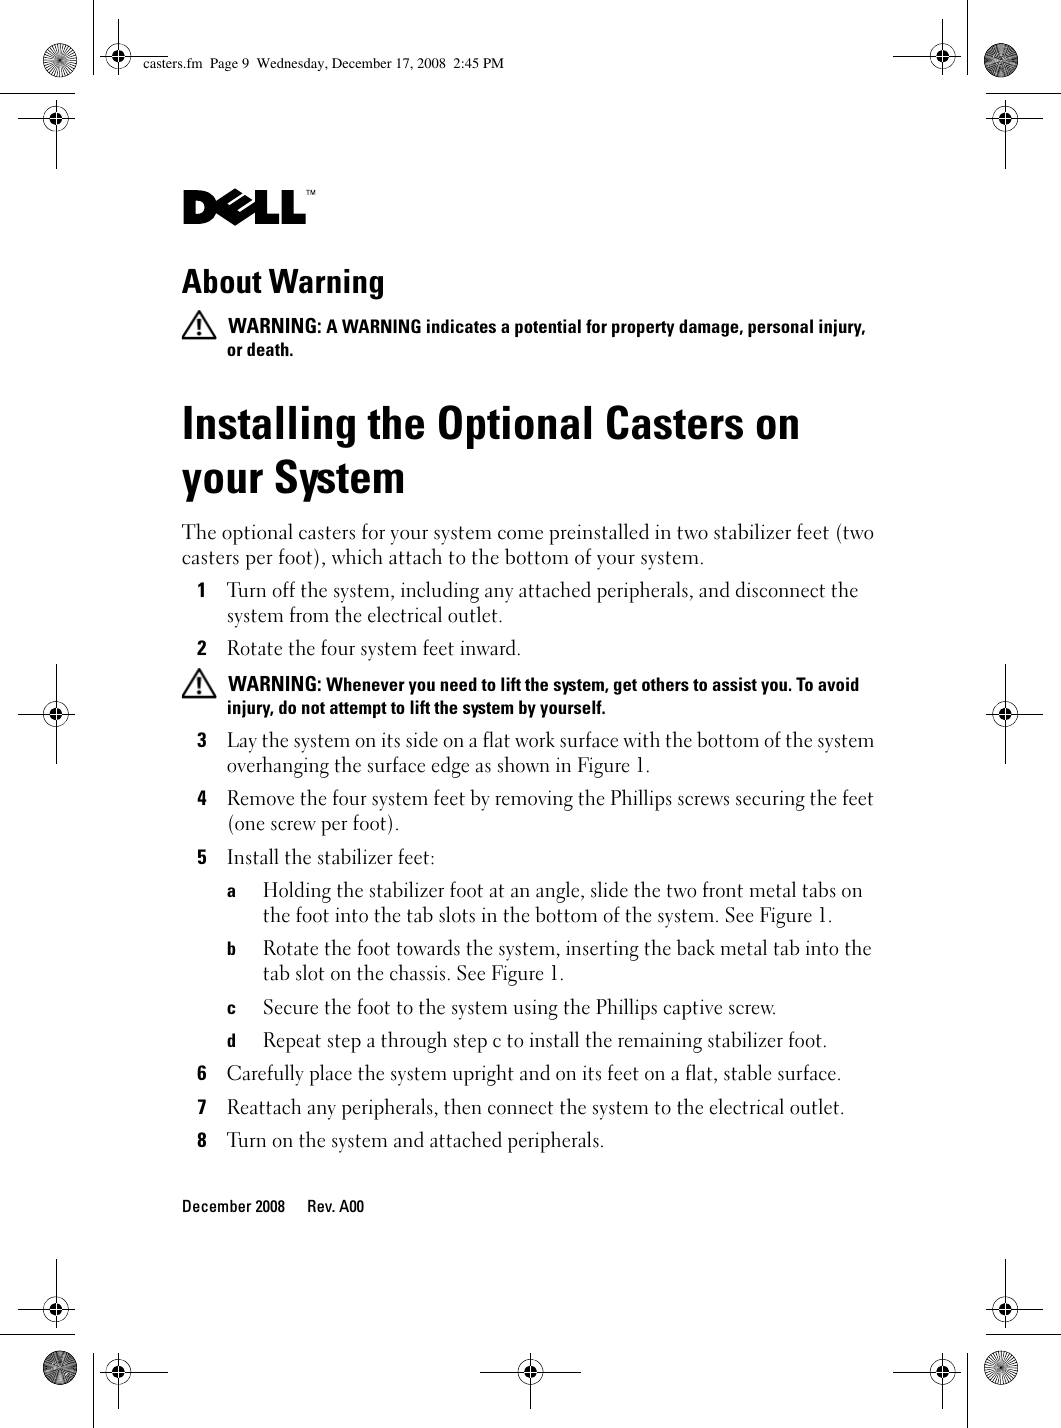 Page 1 of 2 - Dell Dell-Poweredge-T610-Installation-Manual- Installing The Optional Casters On Your System  Dell-poweredge-t610-installation-manual